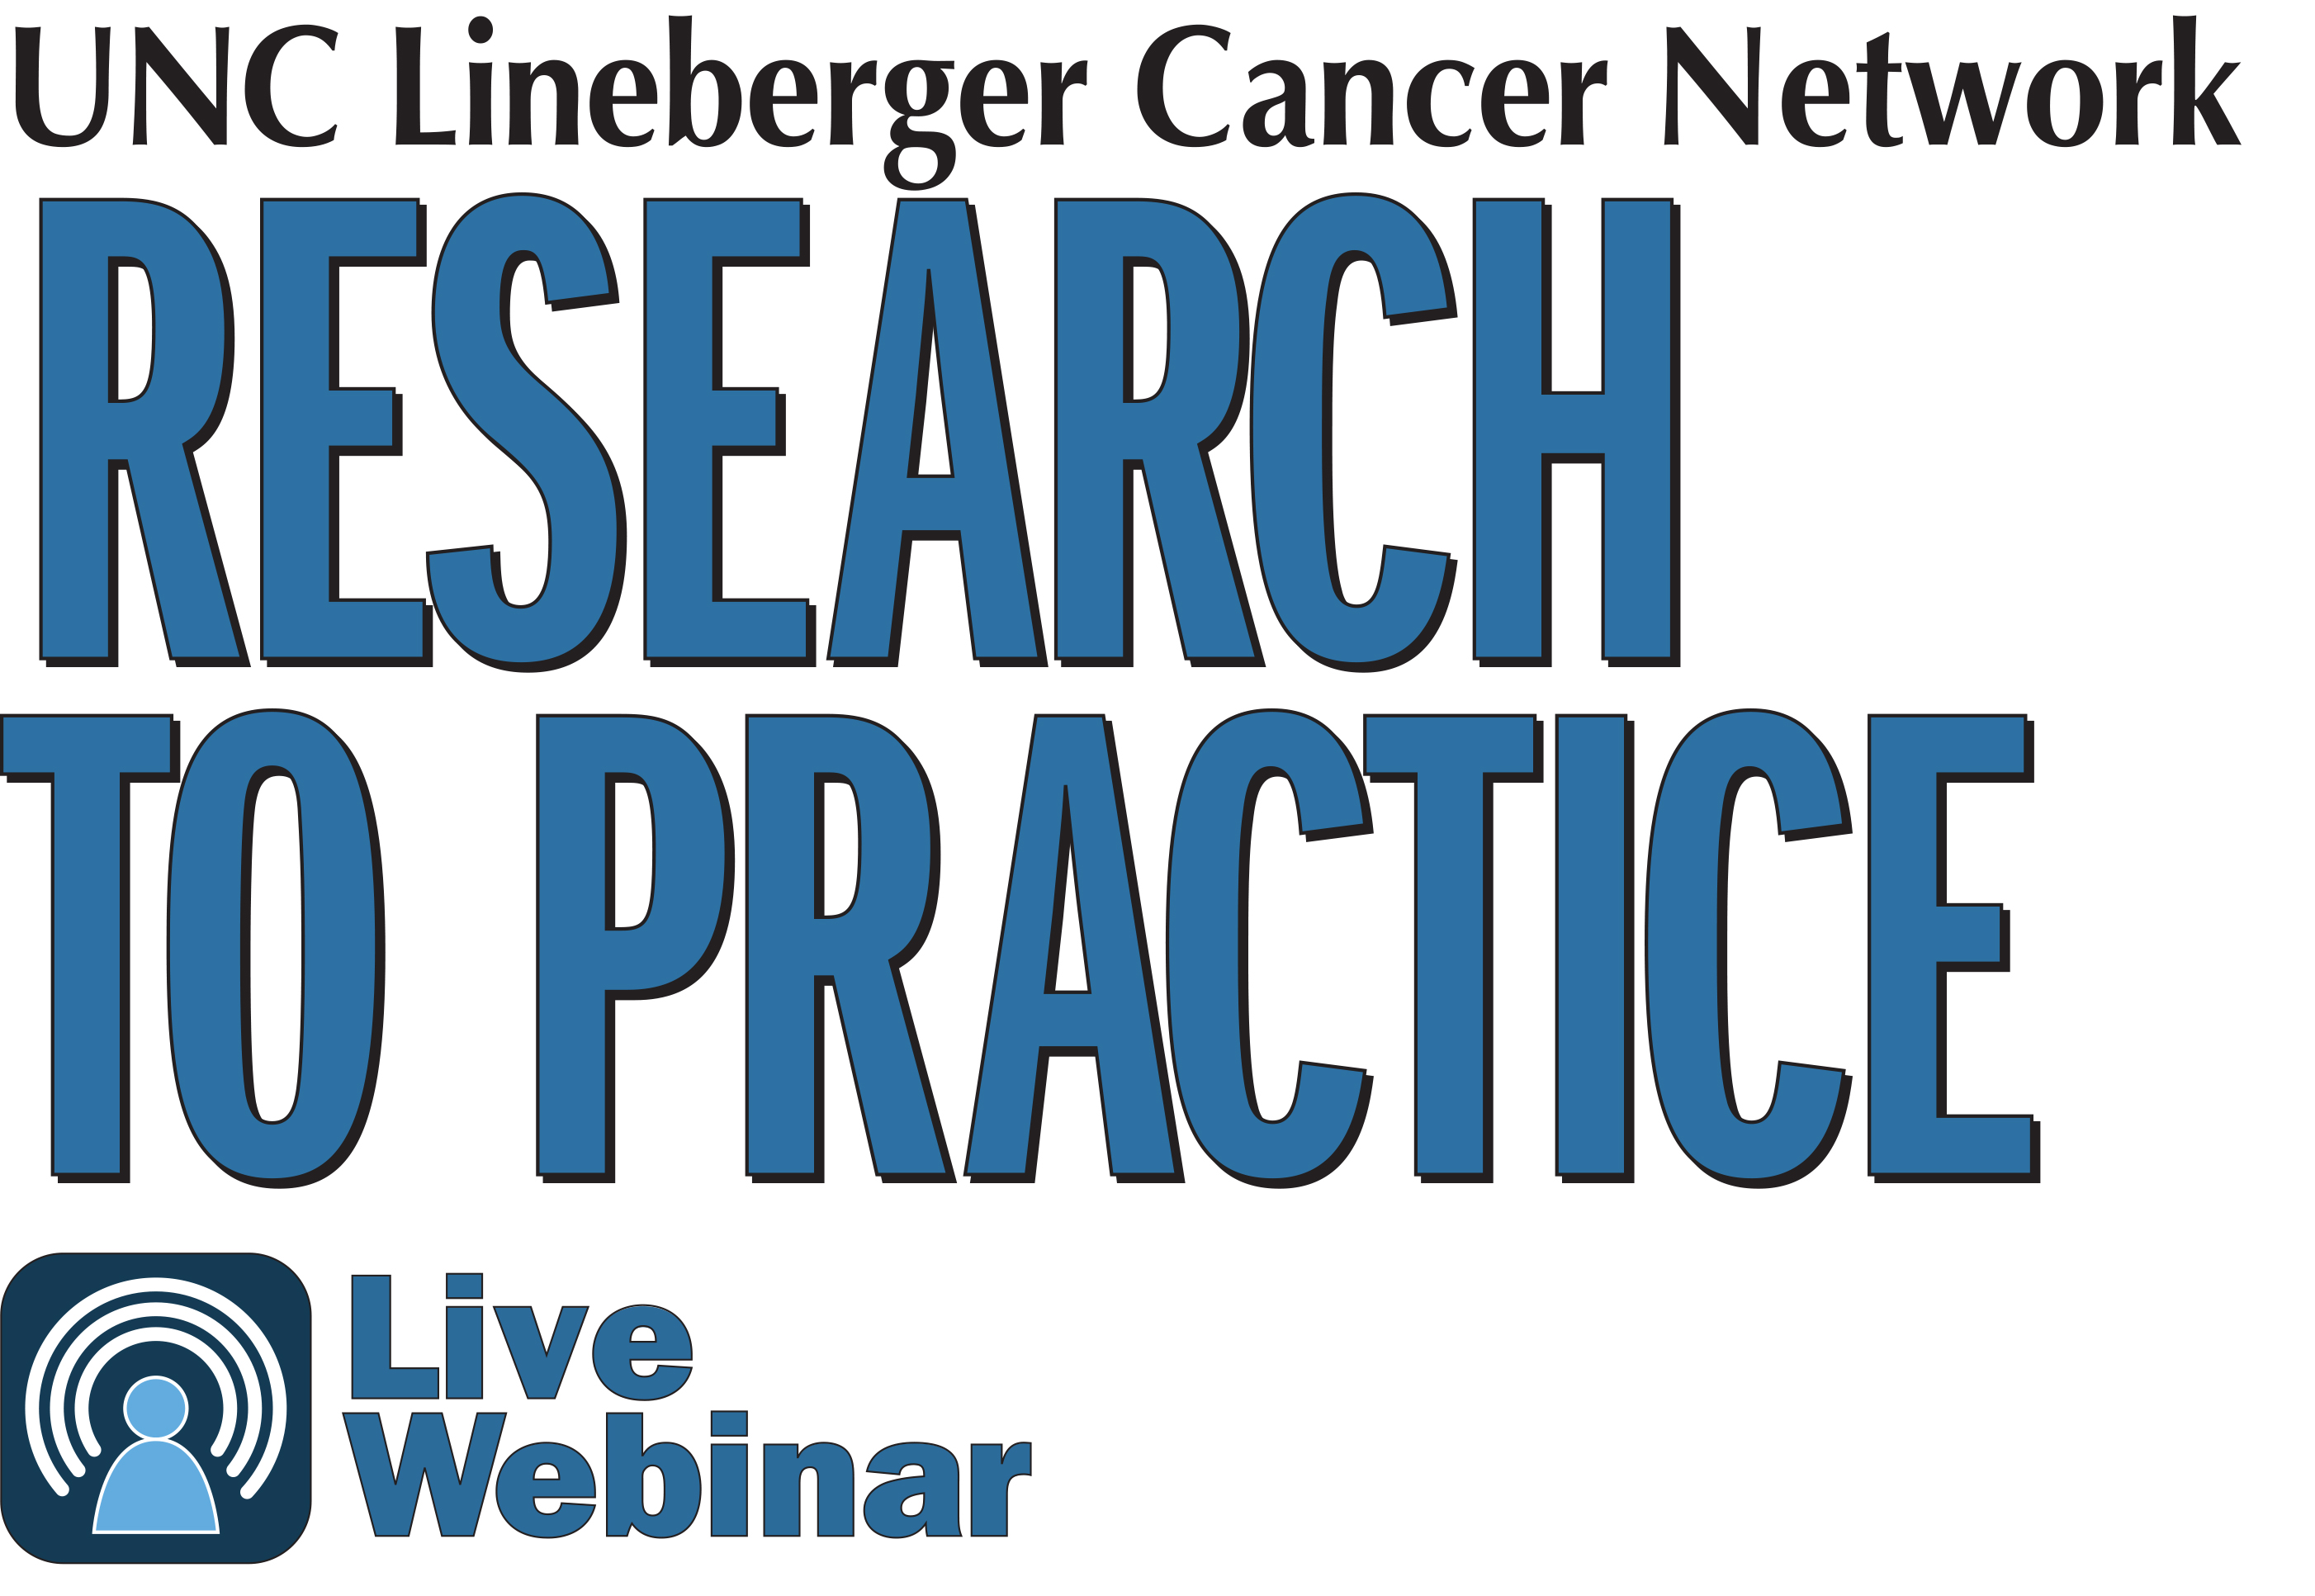 UNC Lineberger Cancer Network's Research to Practice lecture logo with Free CME, CNE, ACPE, ASRT, and CTR continuing education credits mark